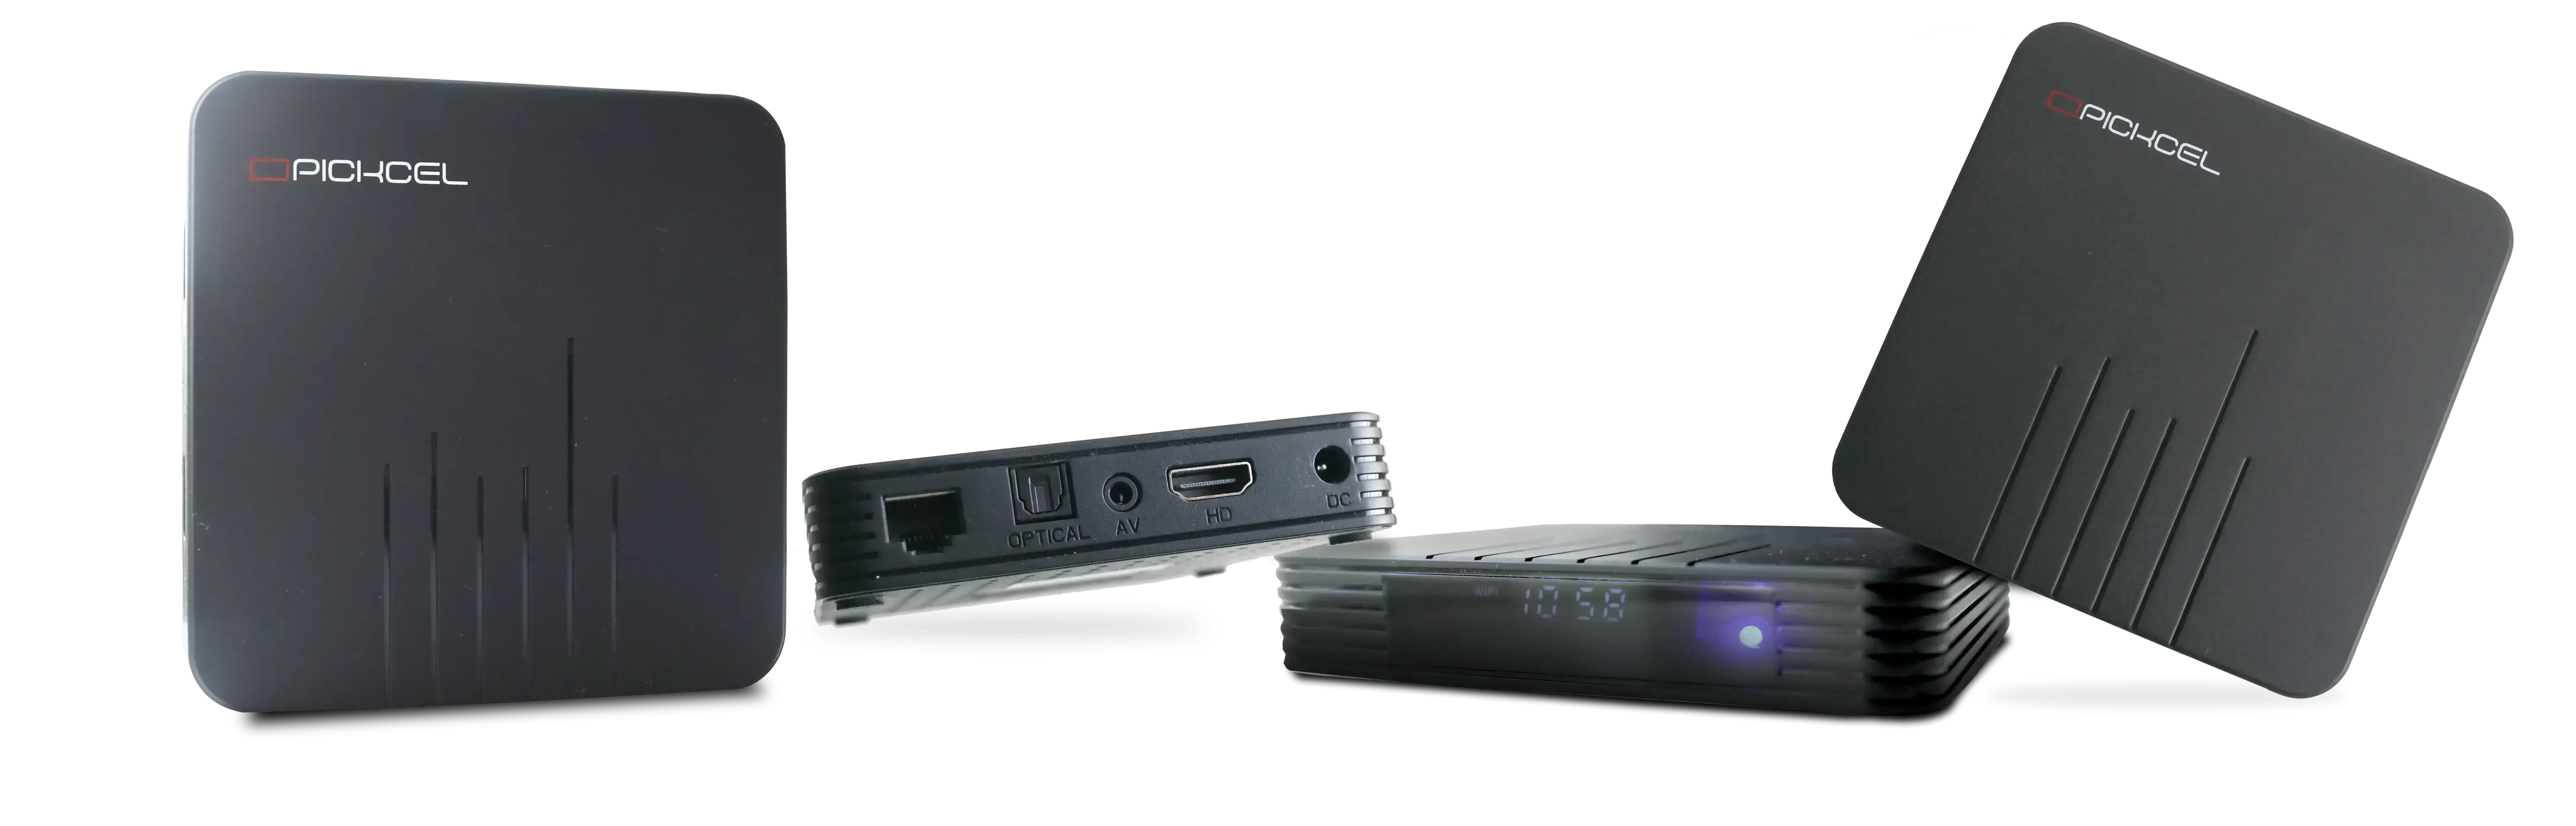 Product  images of Pickcel Android digital signage media player PX300 from different angles